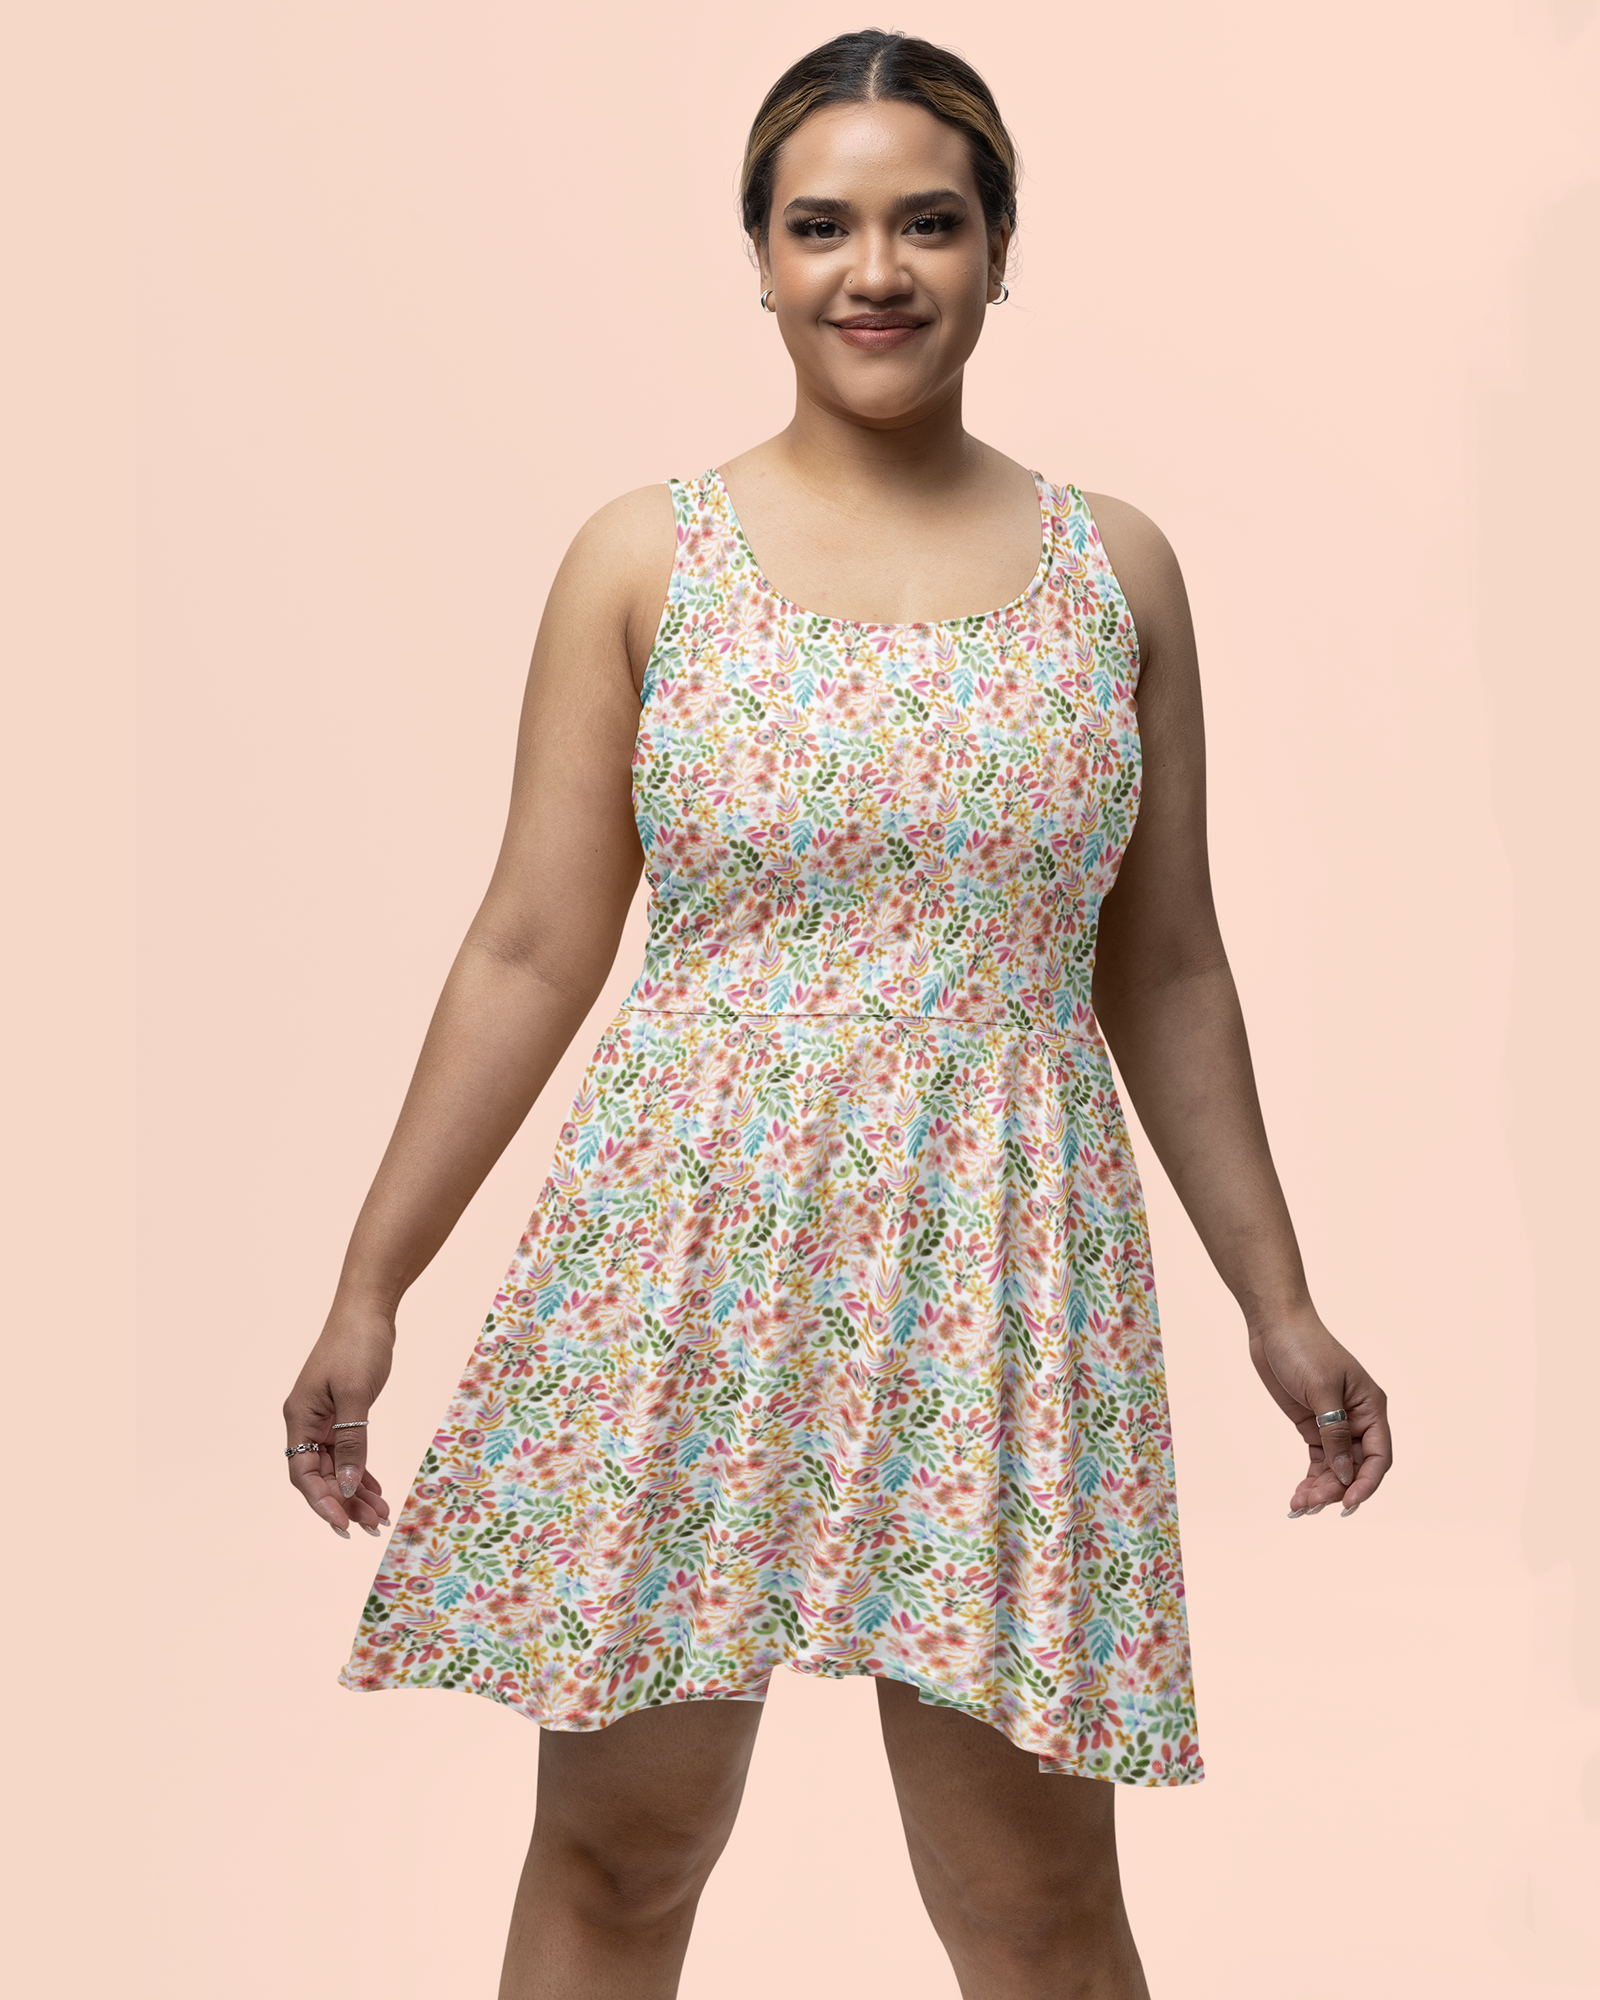 Garden Gala pastel floral sleeveless scoop neck fit and flare dress on smiling plus-size woman standing in front of a pink background